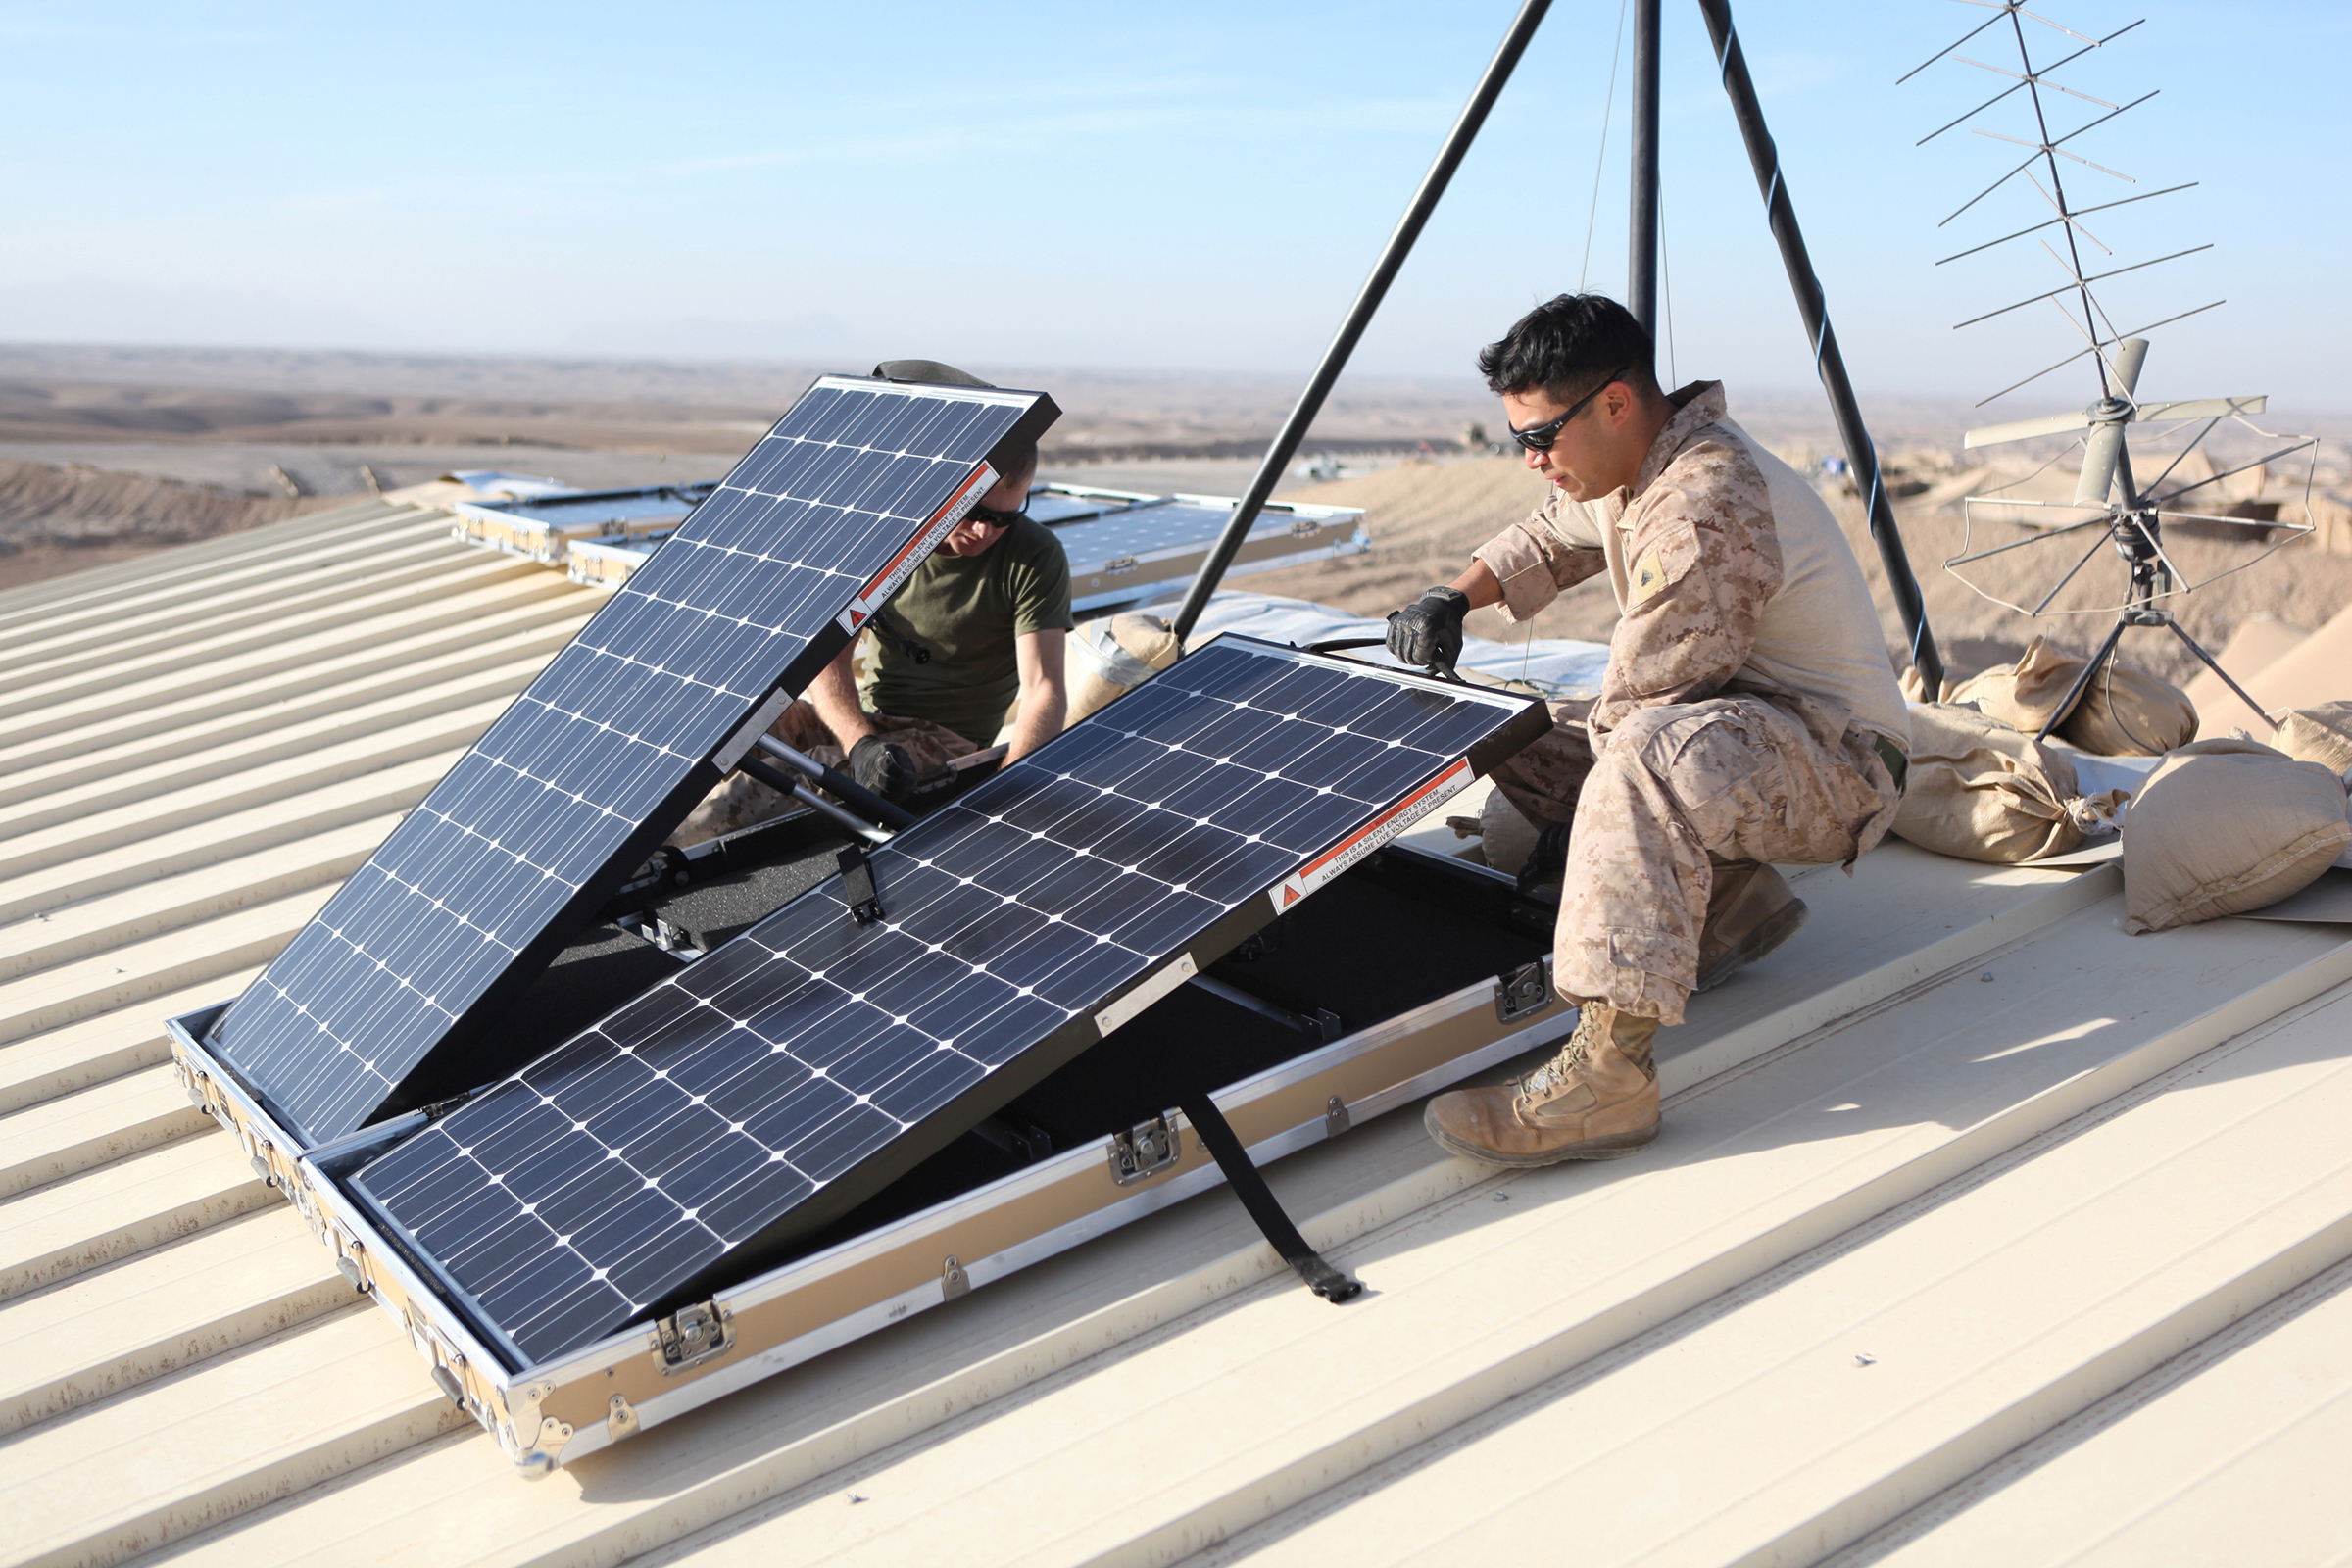 U.S. Marine Corps Corporal Robert G. Sutton (L) and Corporal Moses E. Perez install new solar panels on Combat Outpost Shukvani, Helmand province, Afghanistan, on Nov. 19, 2012 (U.S. Marine Corps/Lance Cpl. Alexander Quiles/Handout/REUTERS)